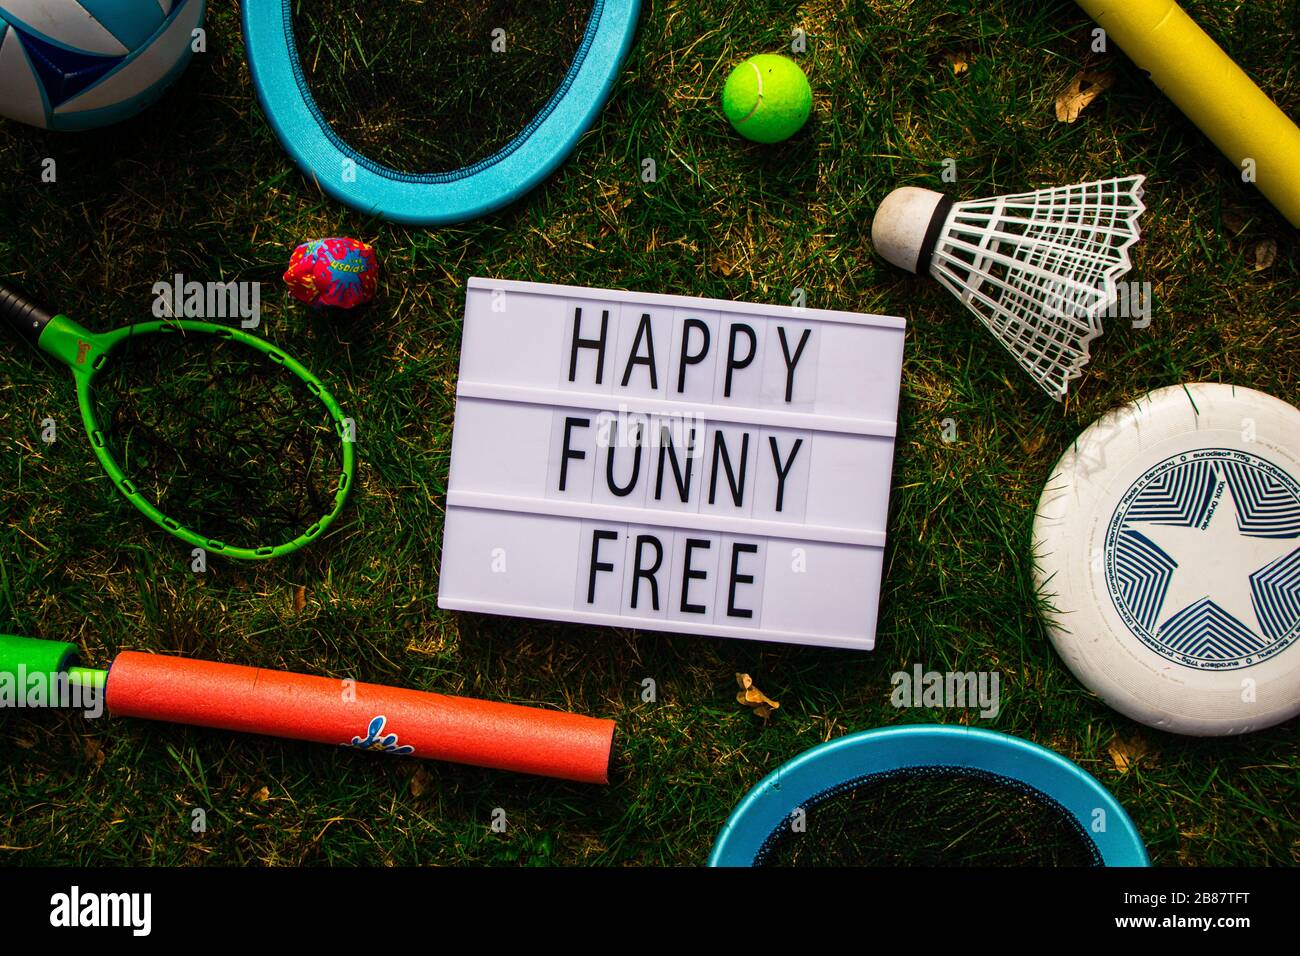 Top down view of a lightbox surrounded by outdoor toys. The lightbox spells: 'Happy Funny Free'. Lifestyle, outside, background, summer, happy. Stock Photo